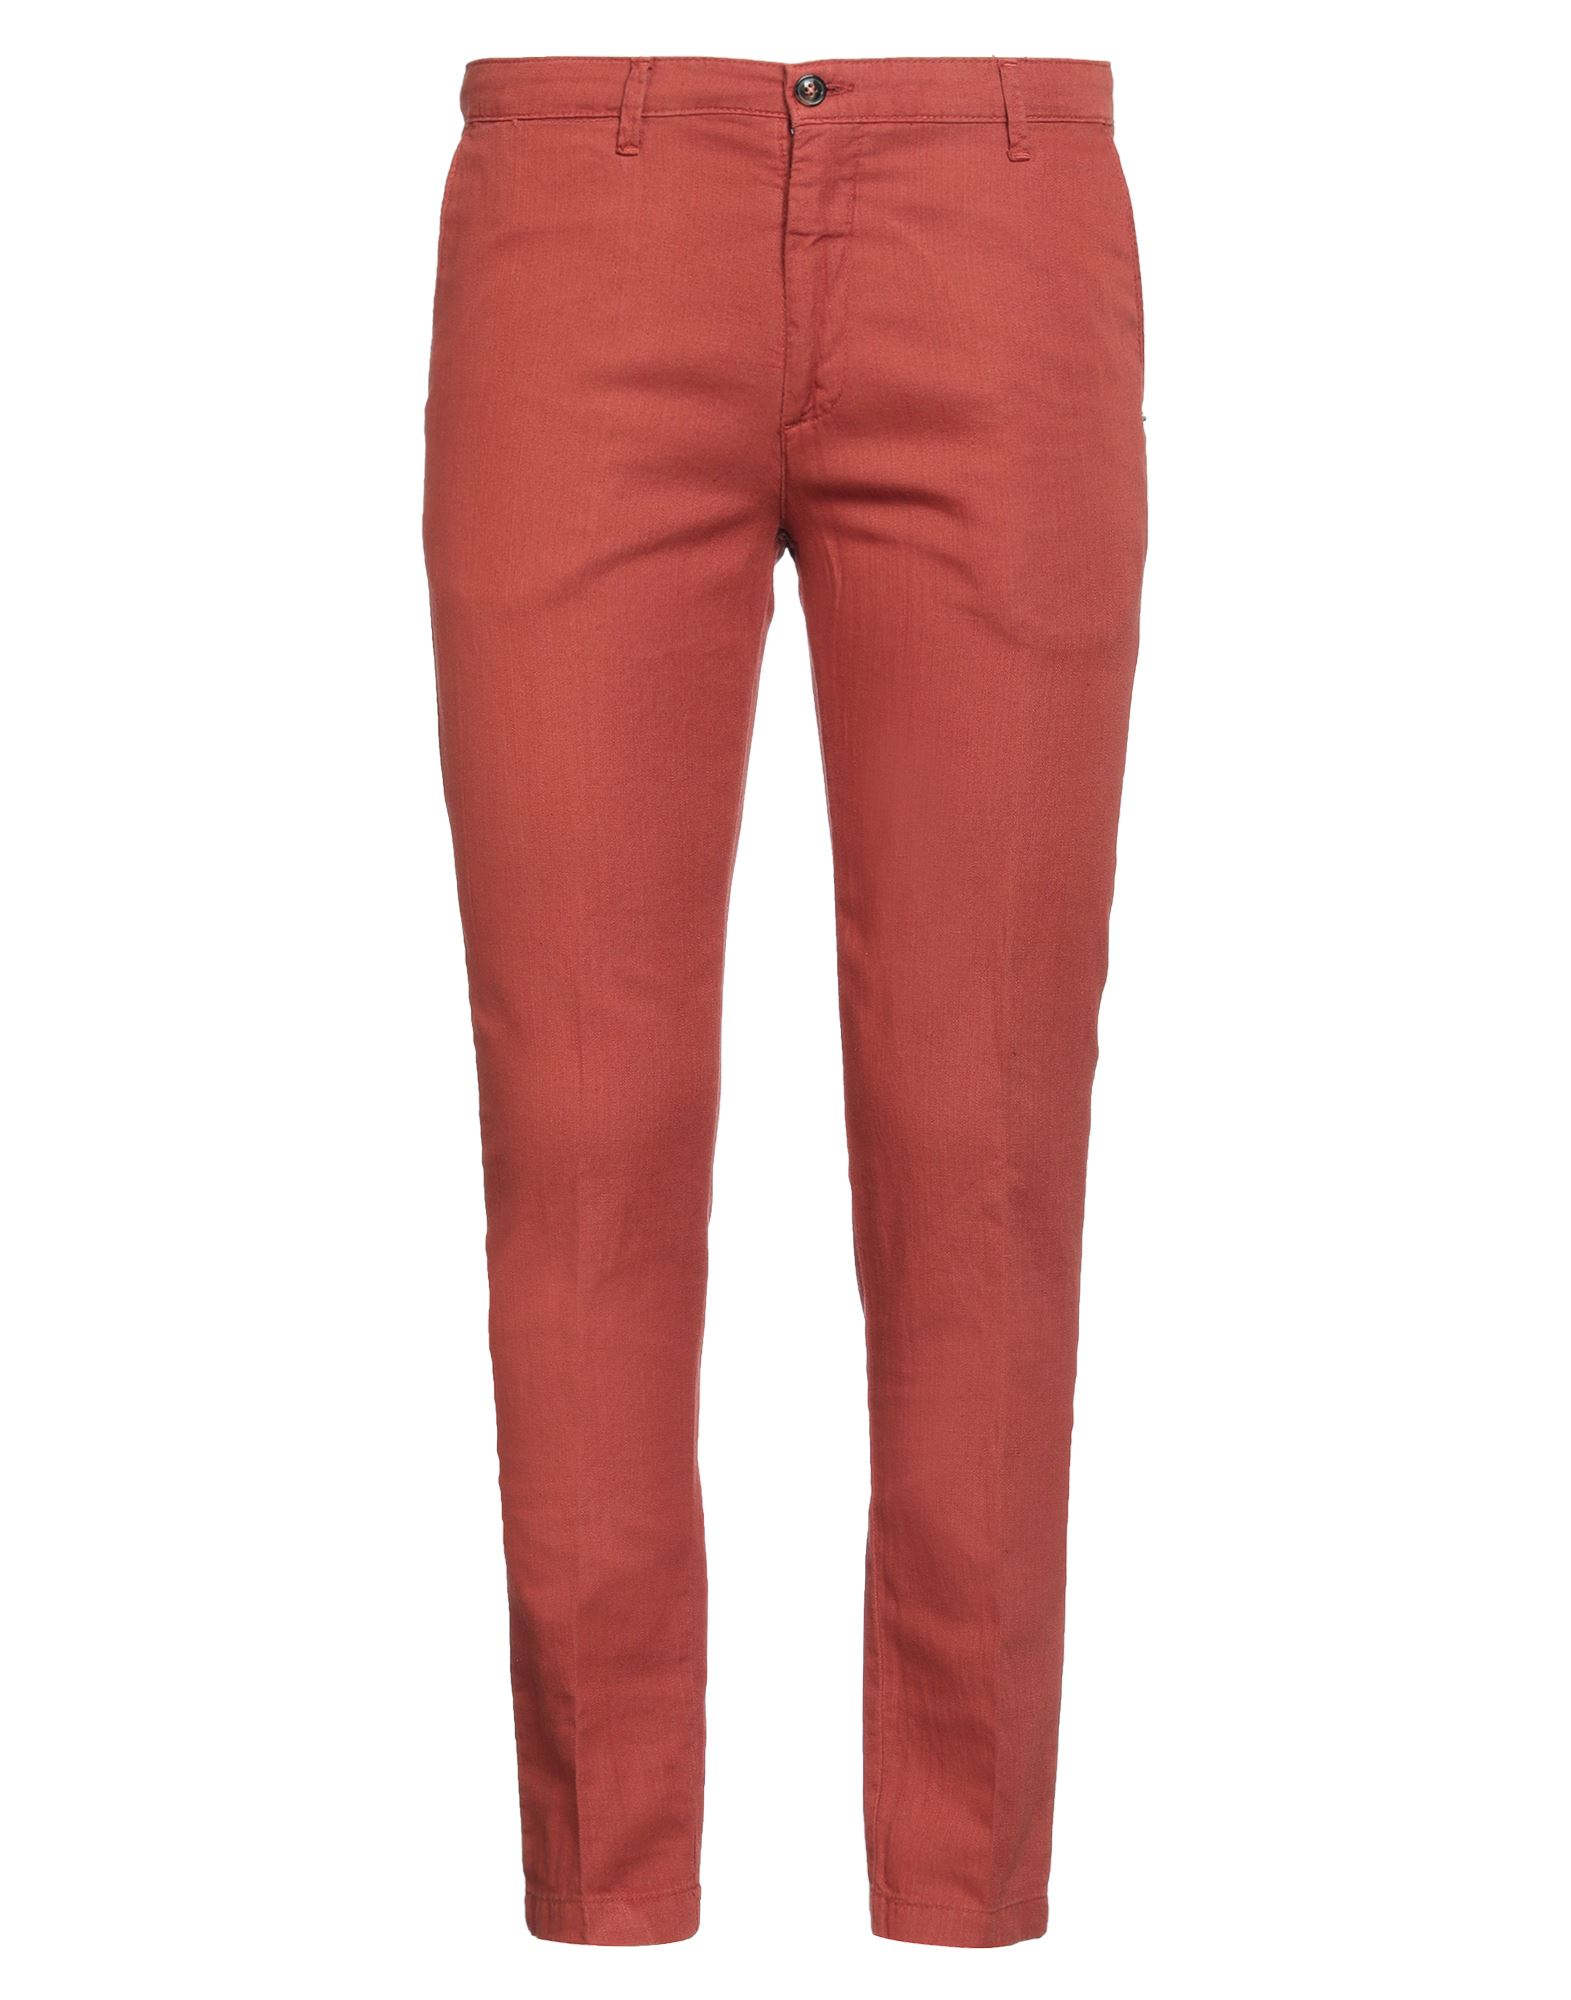 Les Copains Man Pants Rust Size 36 Cotton, Elastane In Red